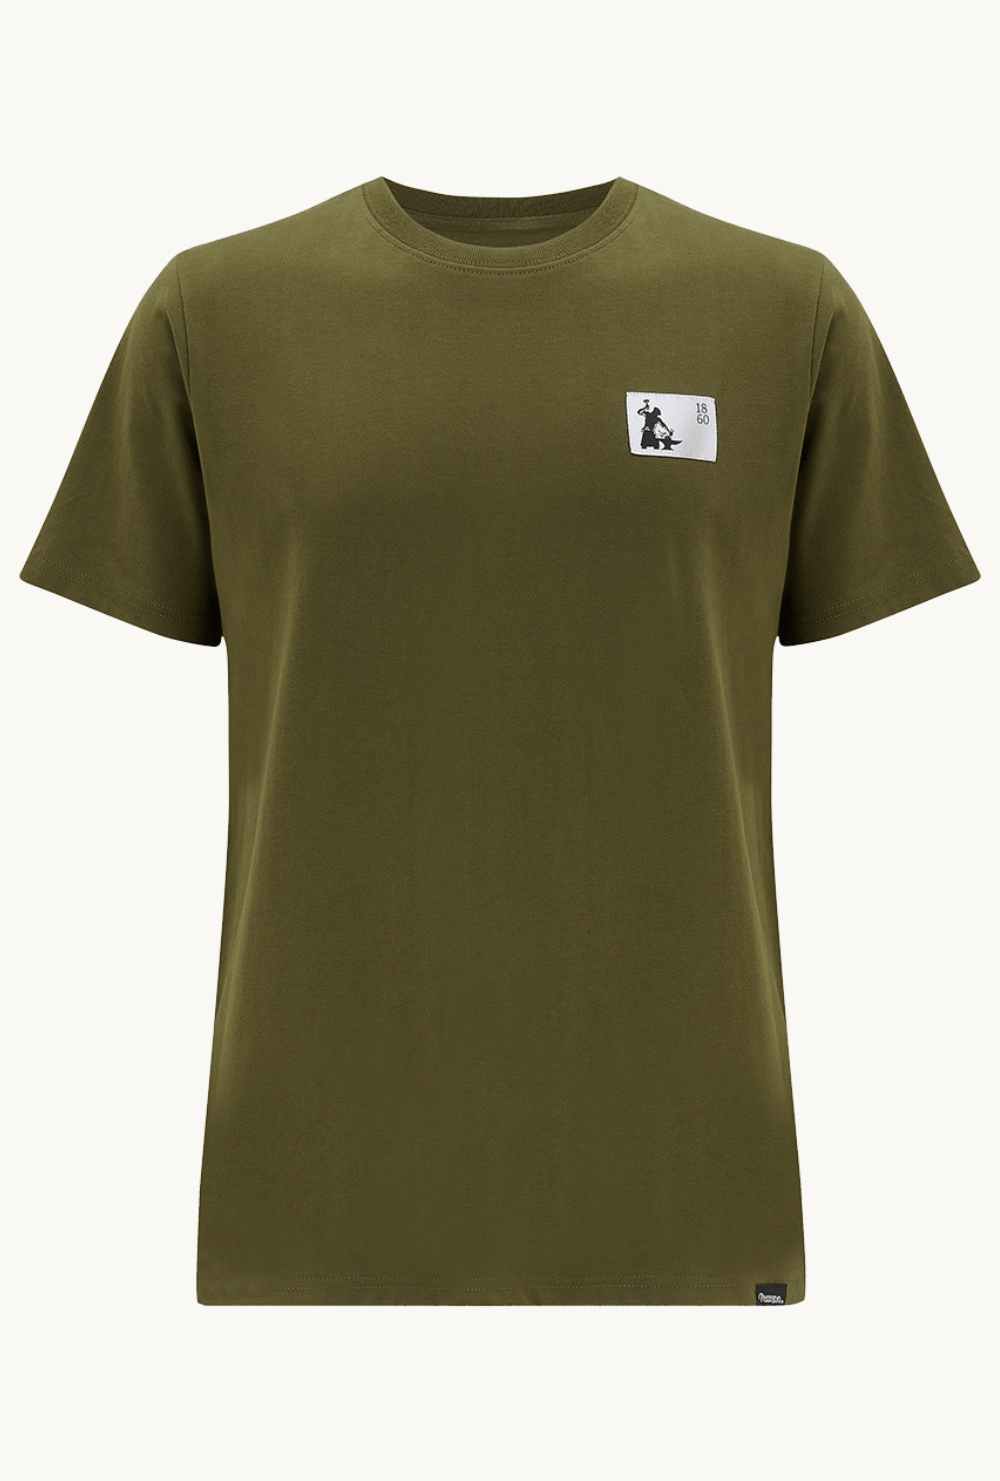 Pearson 1860  Put The Hammer Down - 100% Organic Cotton Unisex Cycling T-shirt Olive  Large / Olive